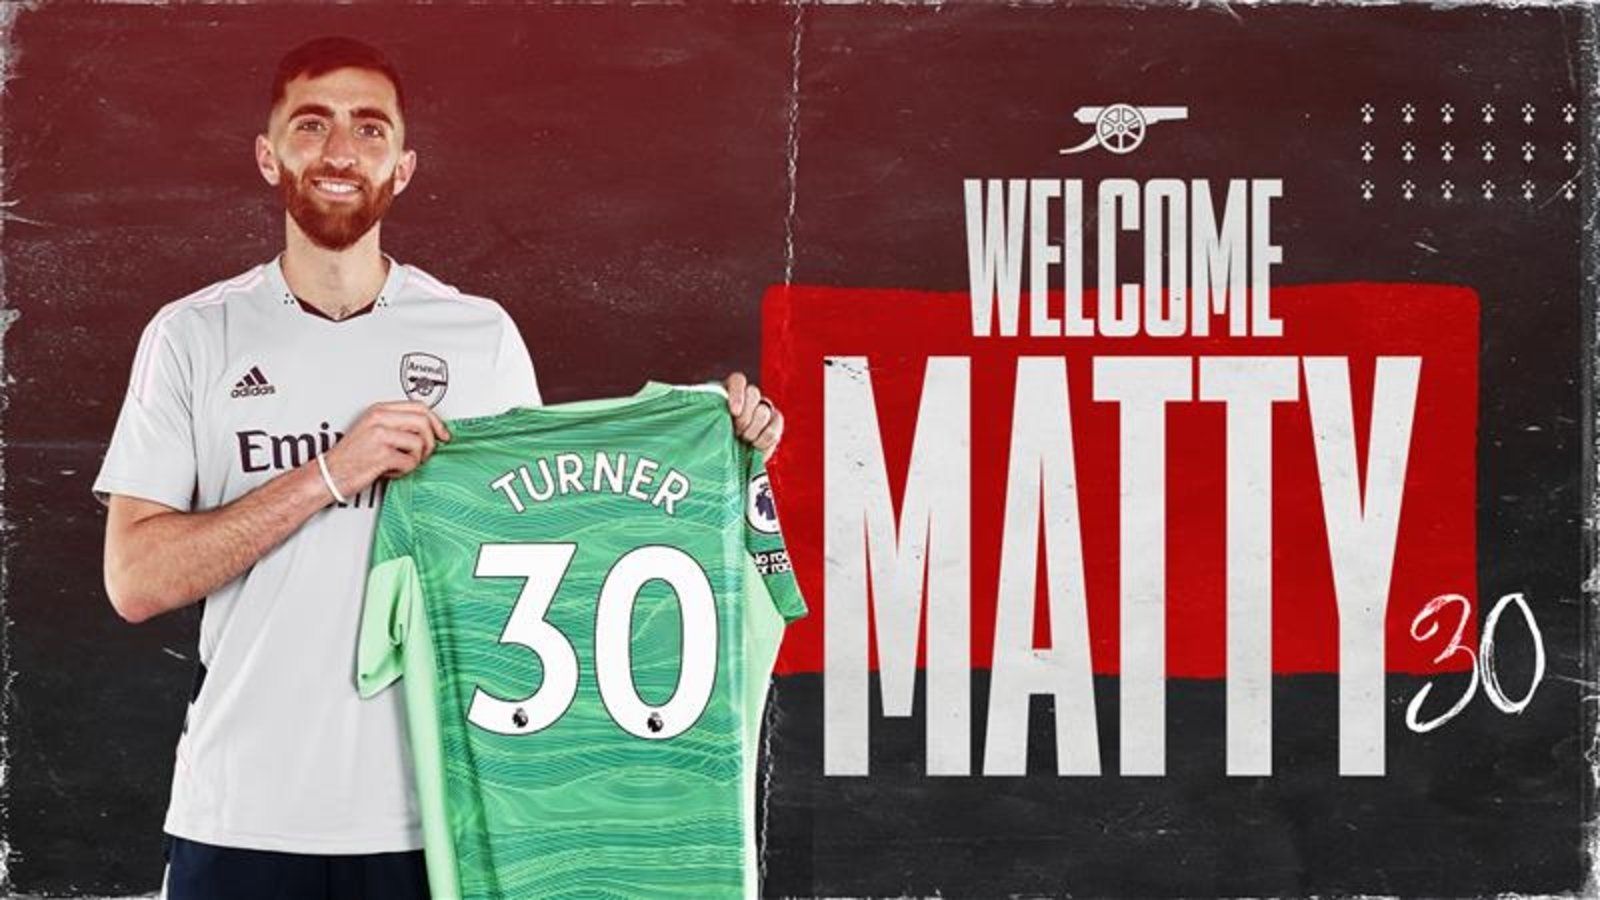 Matt Turner to join Arsenal in June, play final New England